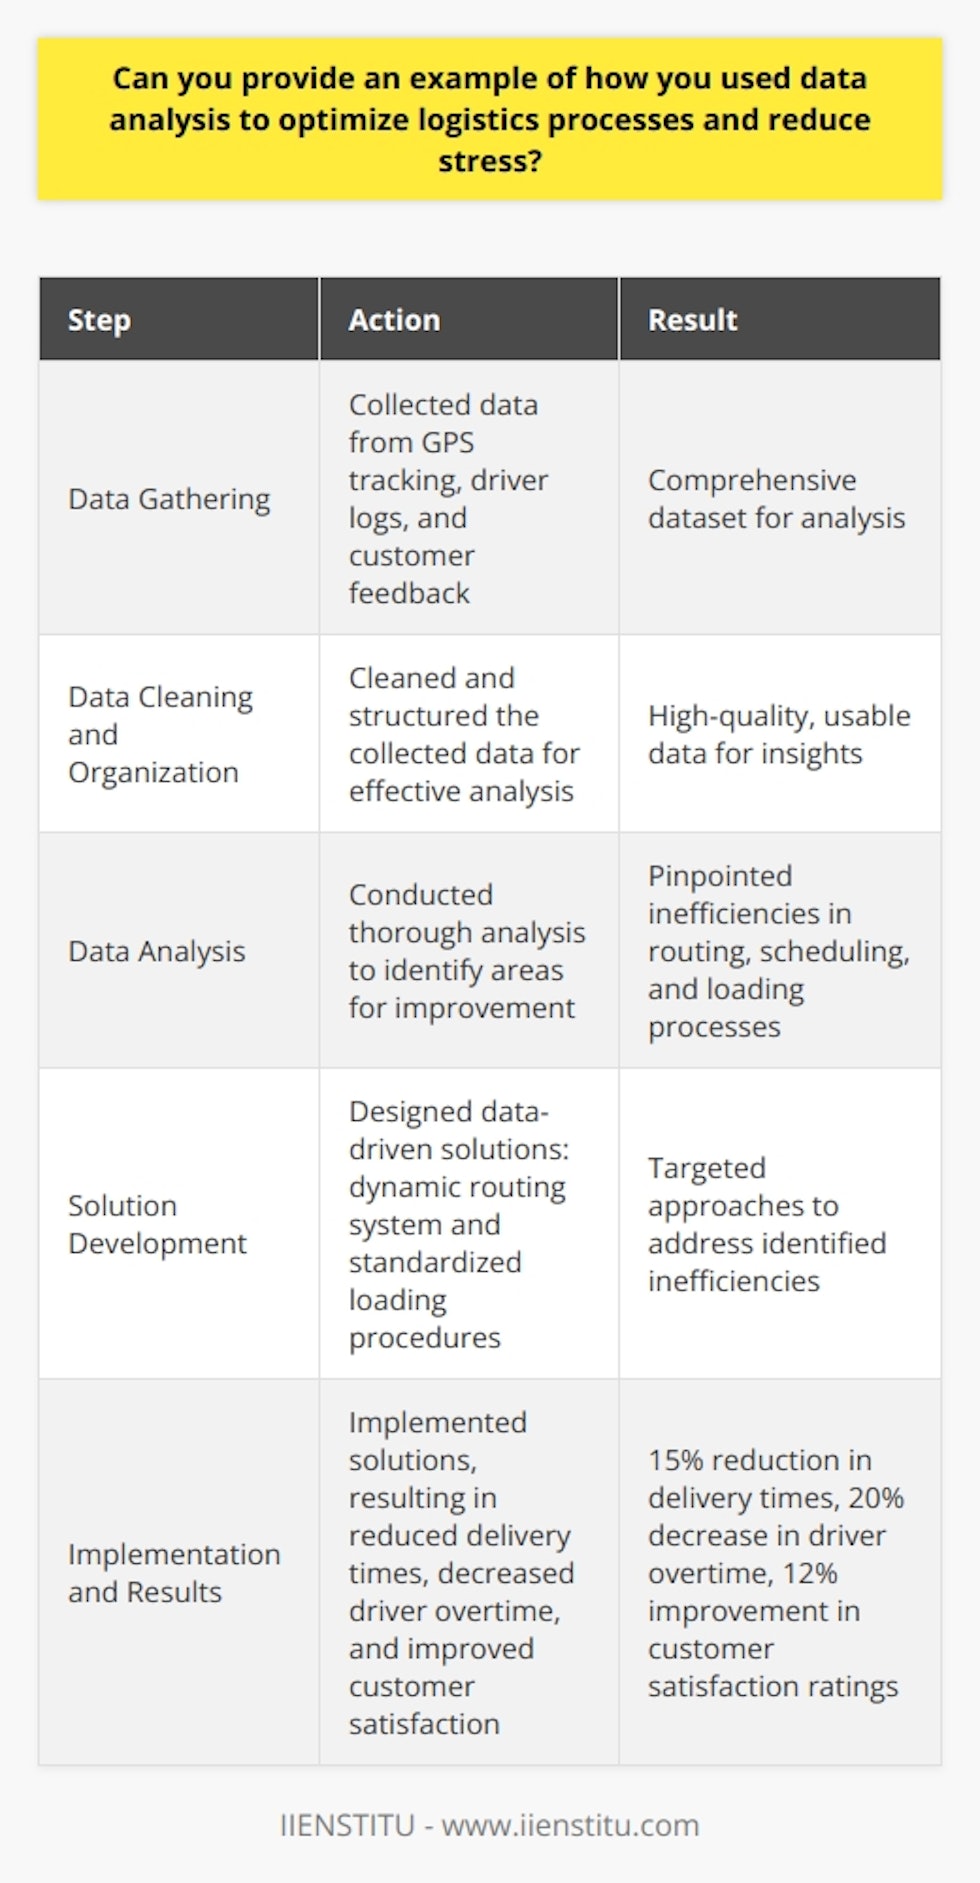 In my previous role as a logistics analyst, I successfully utilized data analysis to optimize processes and reduce stress. By carefully examining our transportation data, I identified inefficiencies in our routing and scheduling practices. Identifying Improvement Opportunities I began by gathering data from various sources, including GPS tracking, driver logs, and customer feedback. After cleaning and organizing the data, I conducted a thorough analysis to pinpoint areas for improvement. The insights I gained allowed me to develop targeted solutions to streamline our operations. Implementing Data-Driven Solutions One key finding was that our drivers were spending too much time navigating congested urban areas during peak hours. To address this, I proposed a dynamic routing system that adjusted routes based on real-time traffic data. By avoiding heavily congested areas, we reduced delivery times and driver stress levels. Additionally, I discovered that our loading processes were inconsistent across different shifts. By standardizing procedures and implementing a data-driven loading plan, we minimized errors and improved efficiency. This not only reduced stress for our warehouse staff but also ensured timely deliveries to our customers. Achieving Measurable Results The data-driven solutions I implemented resulted in a 15% reduction in average delivery times and a 20% decrease in driver overtime hours. Moreover, customer satisfaction ratings improved by 12% due to more reliable and efficient service. This experience taught me the power of leveraging data to drive meaningful improvements in logistics processes. I am confident that my skills in data analysis and process optimization can contribute to the success of your organization while fostering a less stressful work environment for our team.